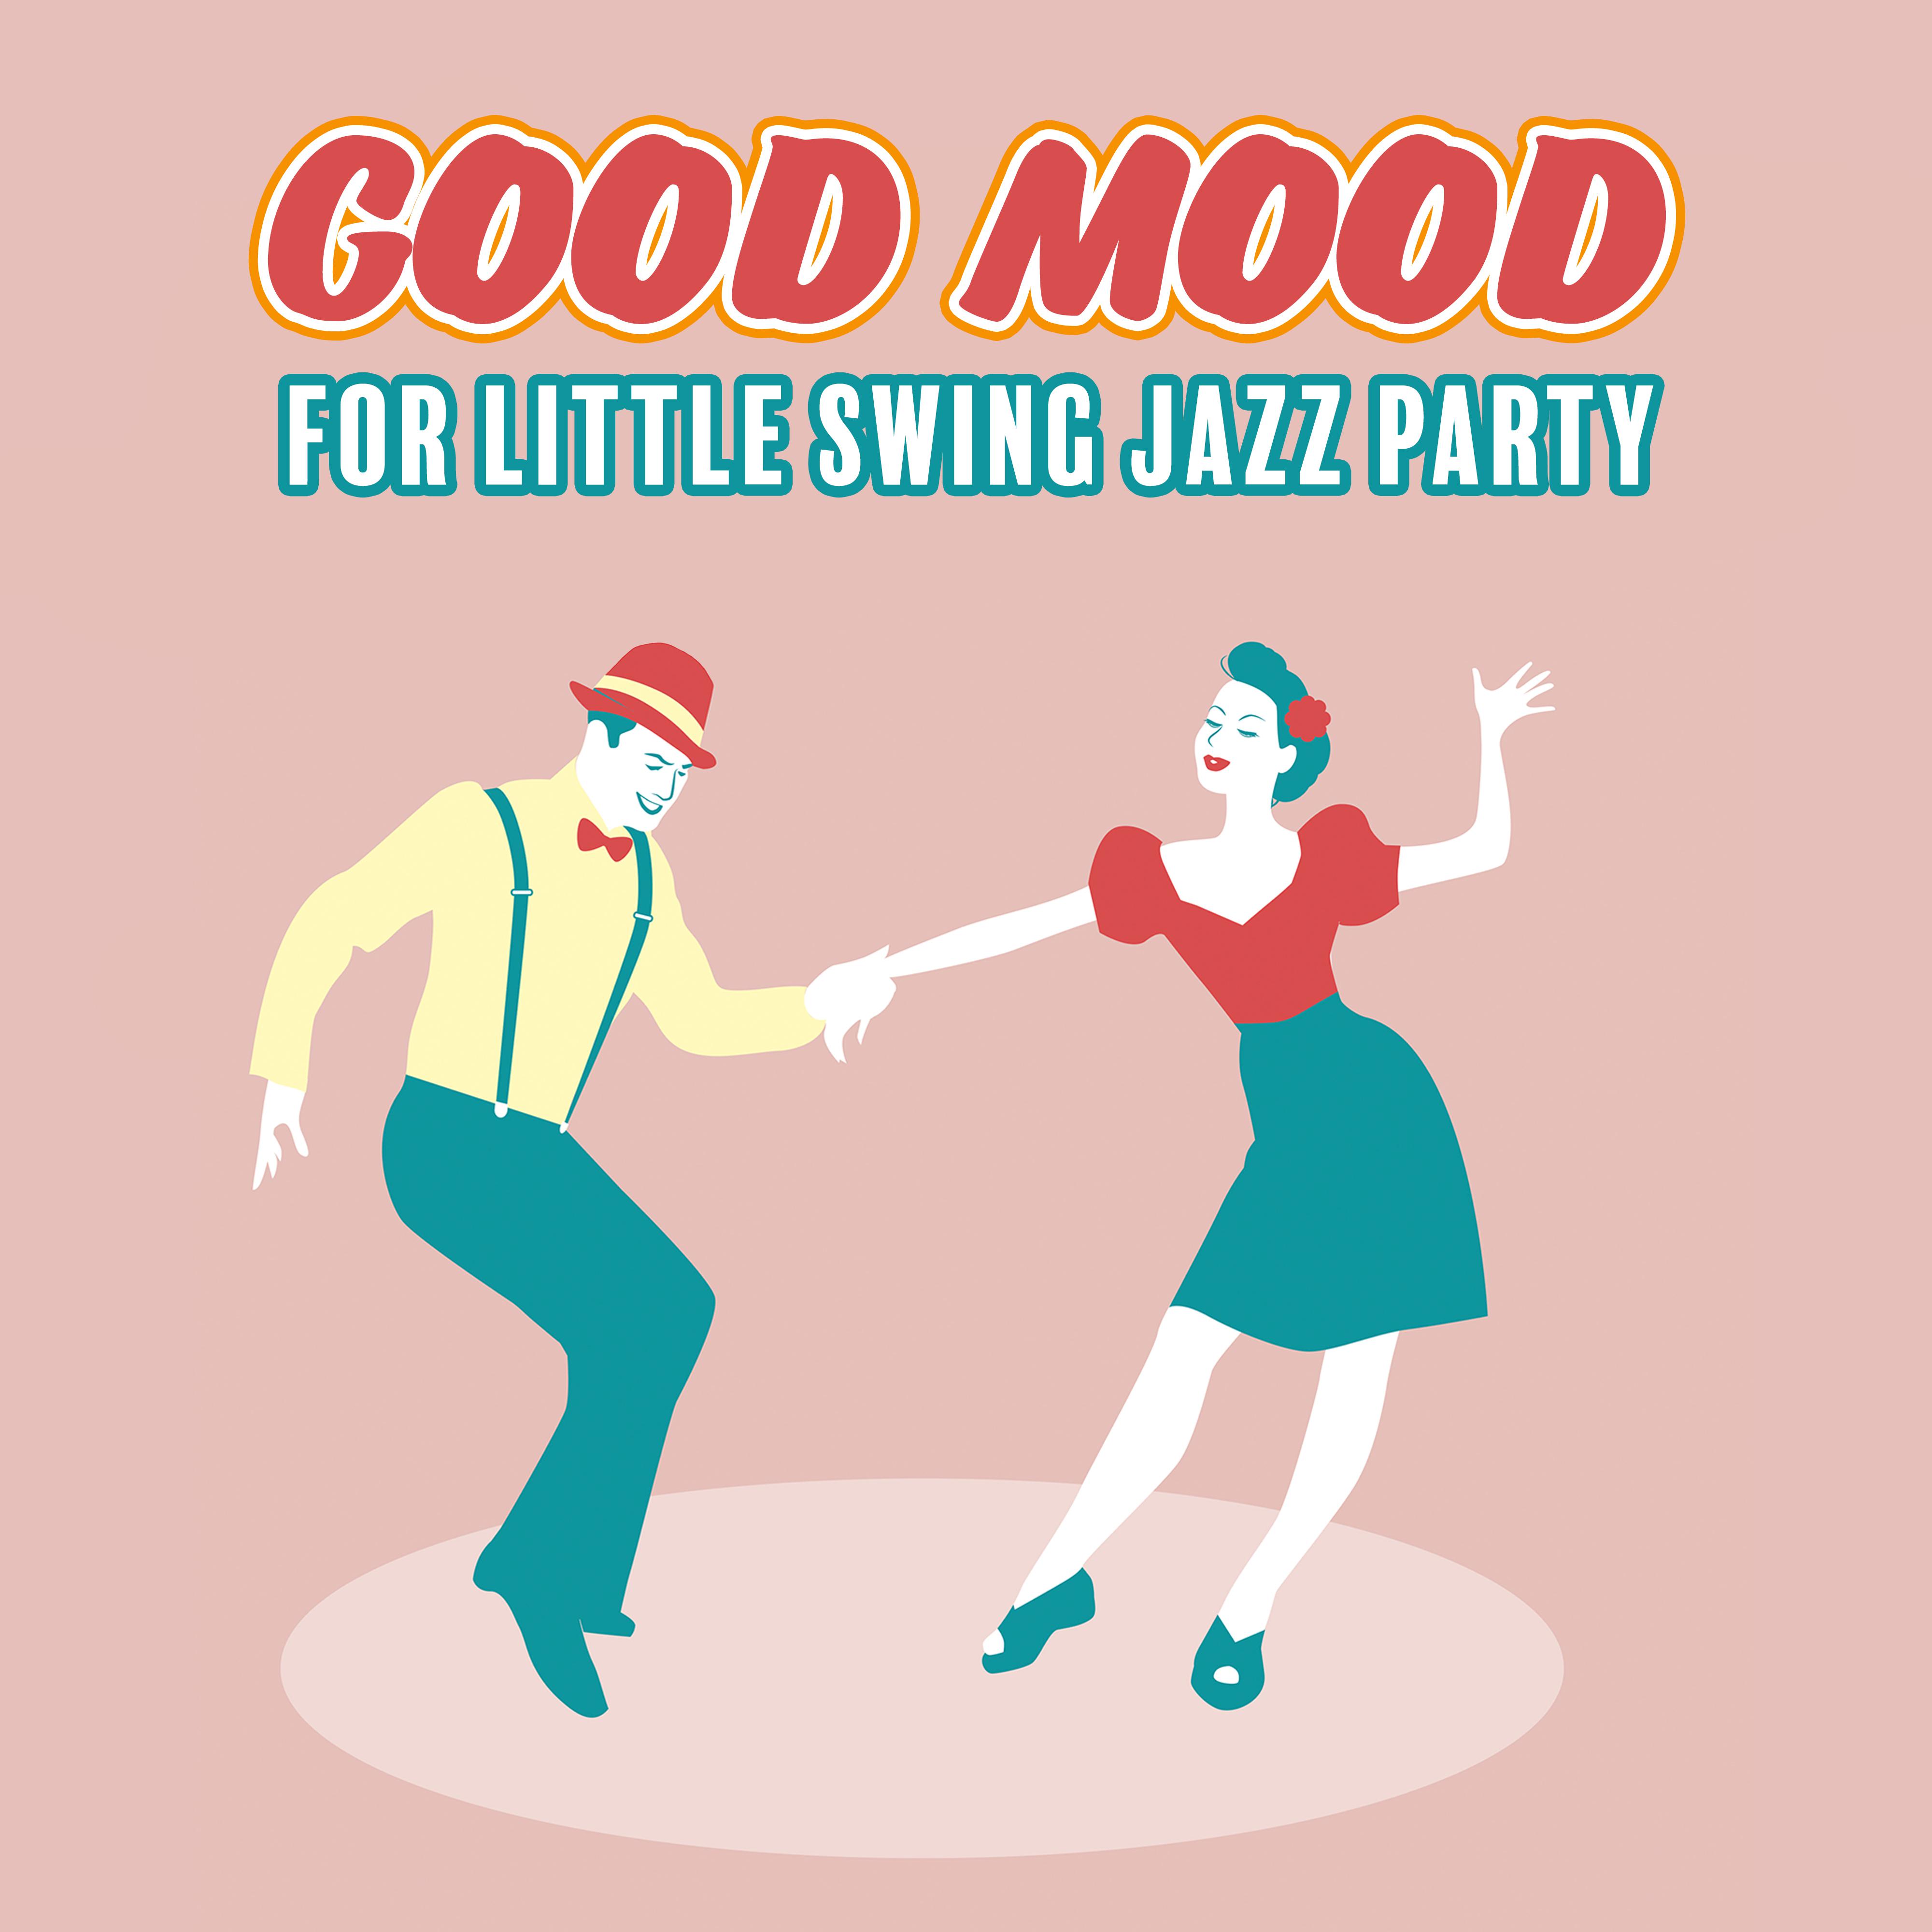 Good Mood for Little Swing Jazz Party: 2019 Happy Instrumental Smooth Jazz Music in Swing Vintage Style Created for Oldschool Dance Party